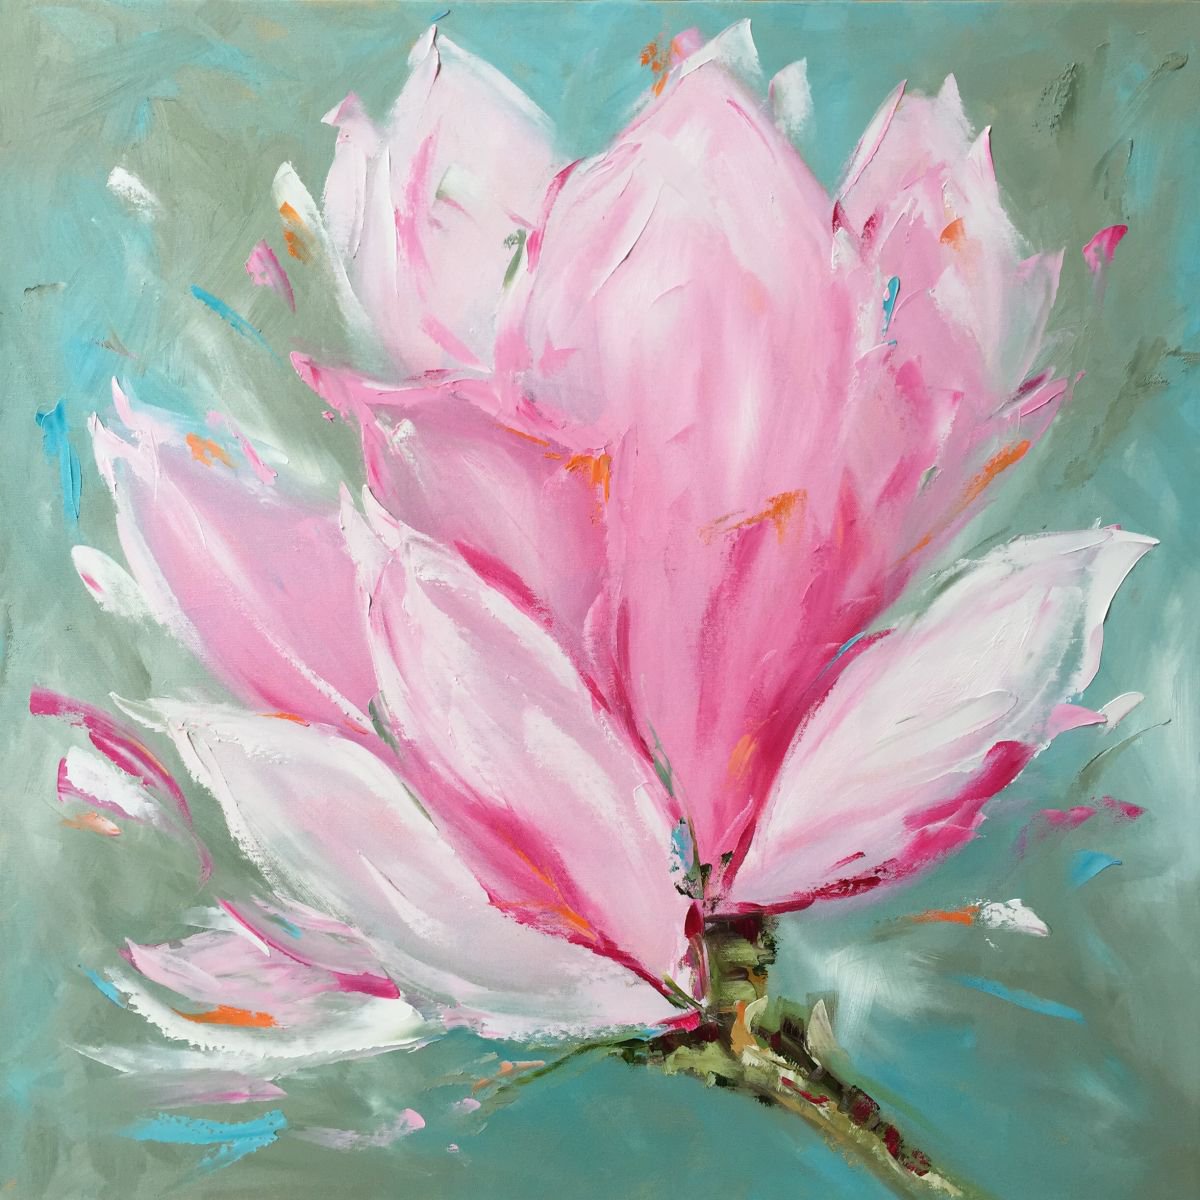 Spring Magnolia 30x30 oil on canvas with brush and palette knife by Emma Bell